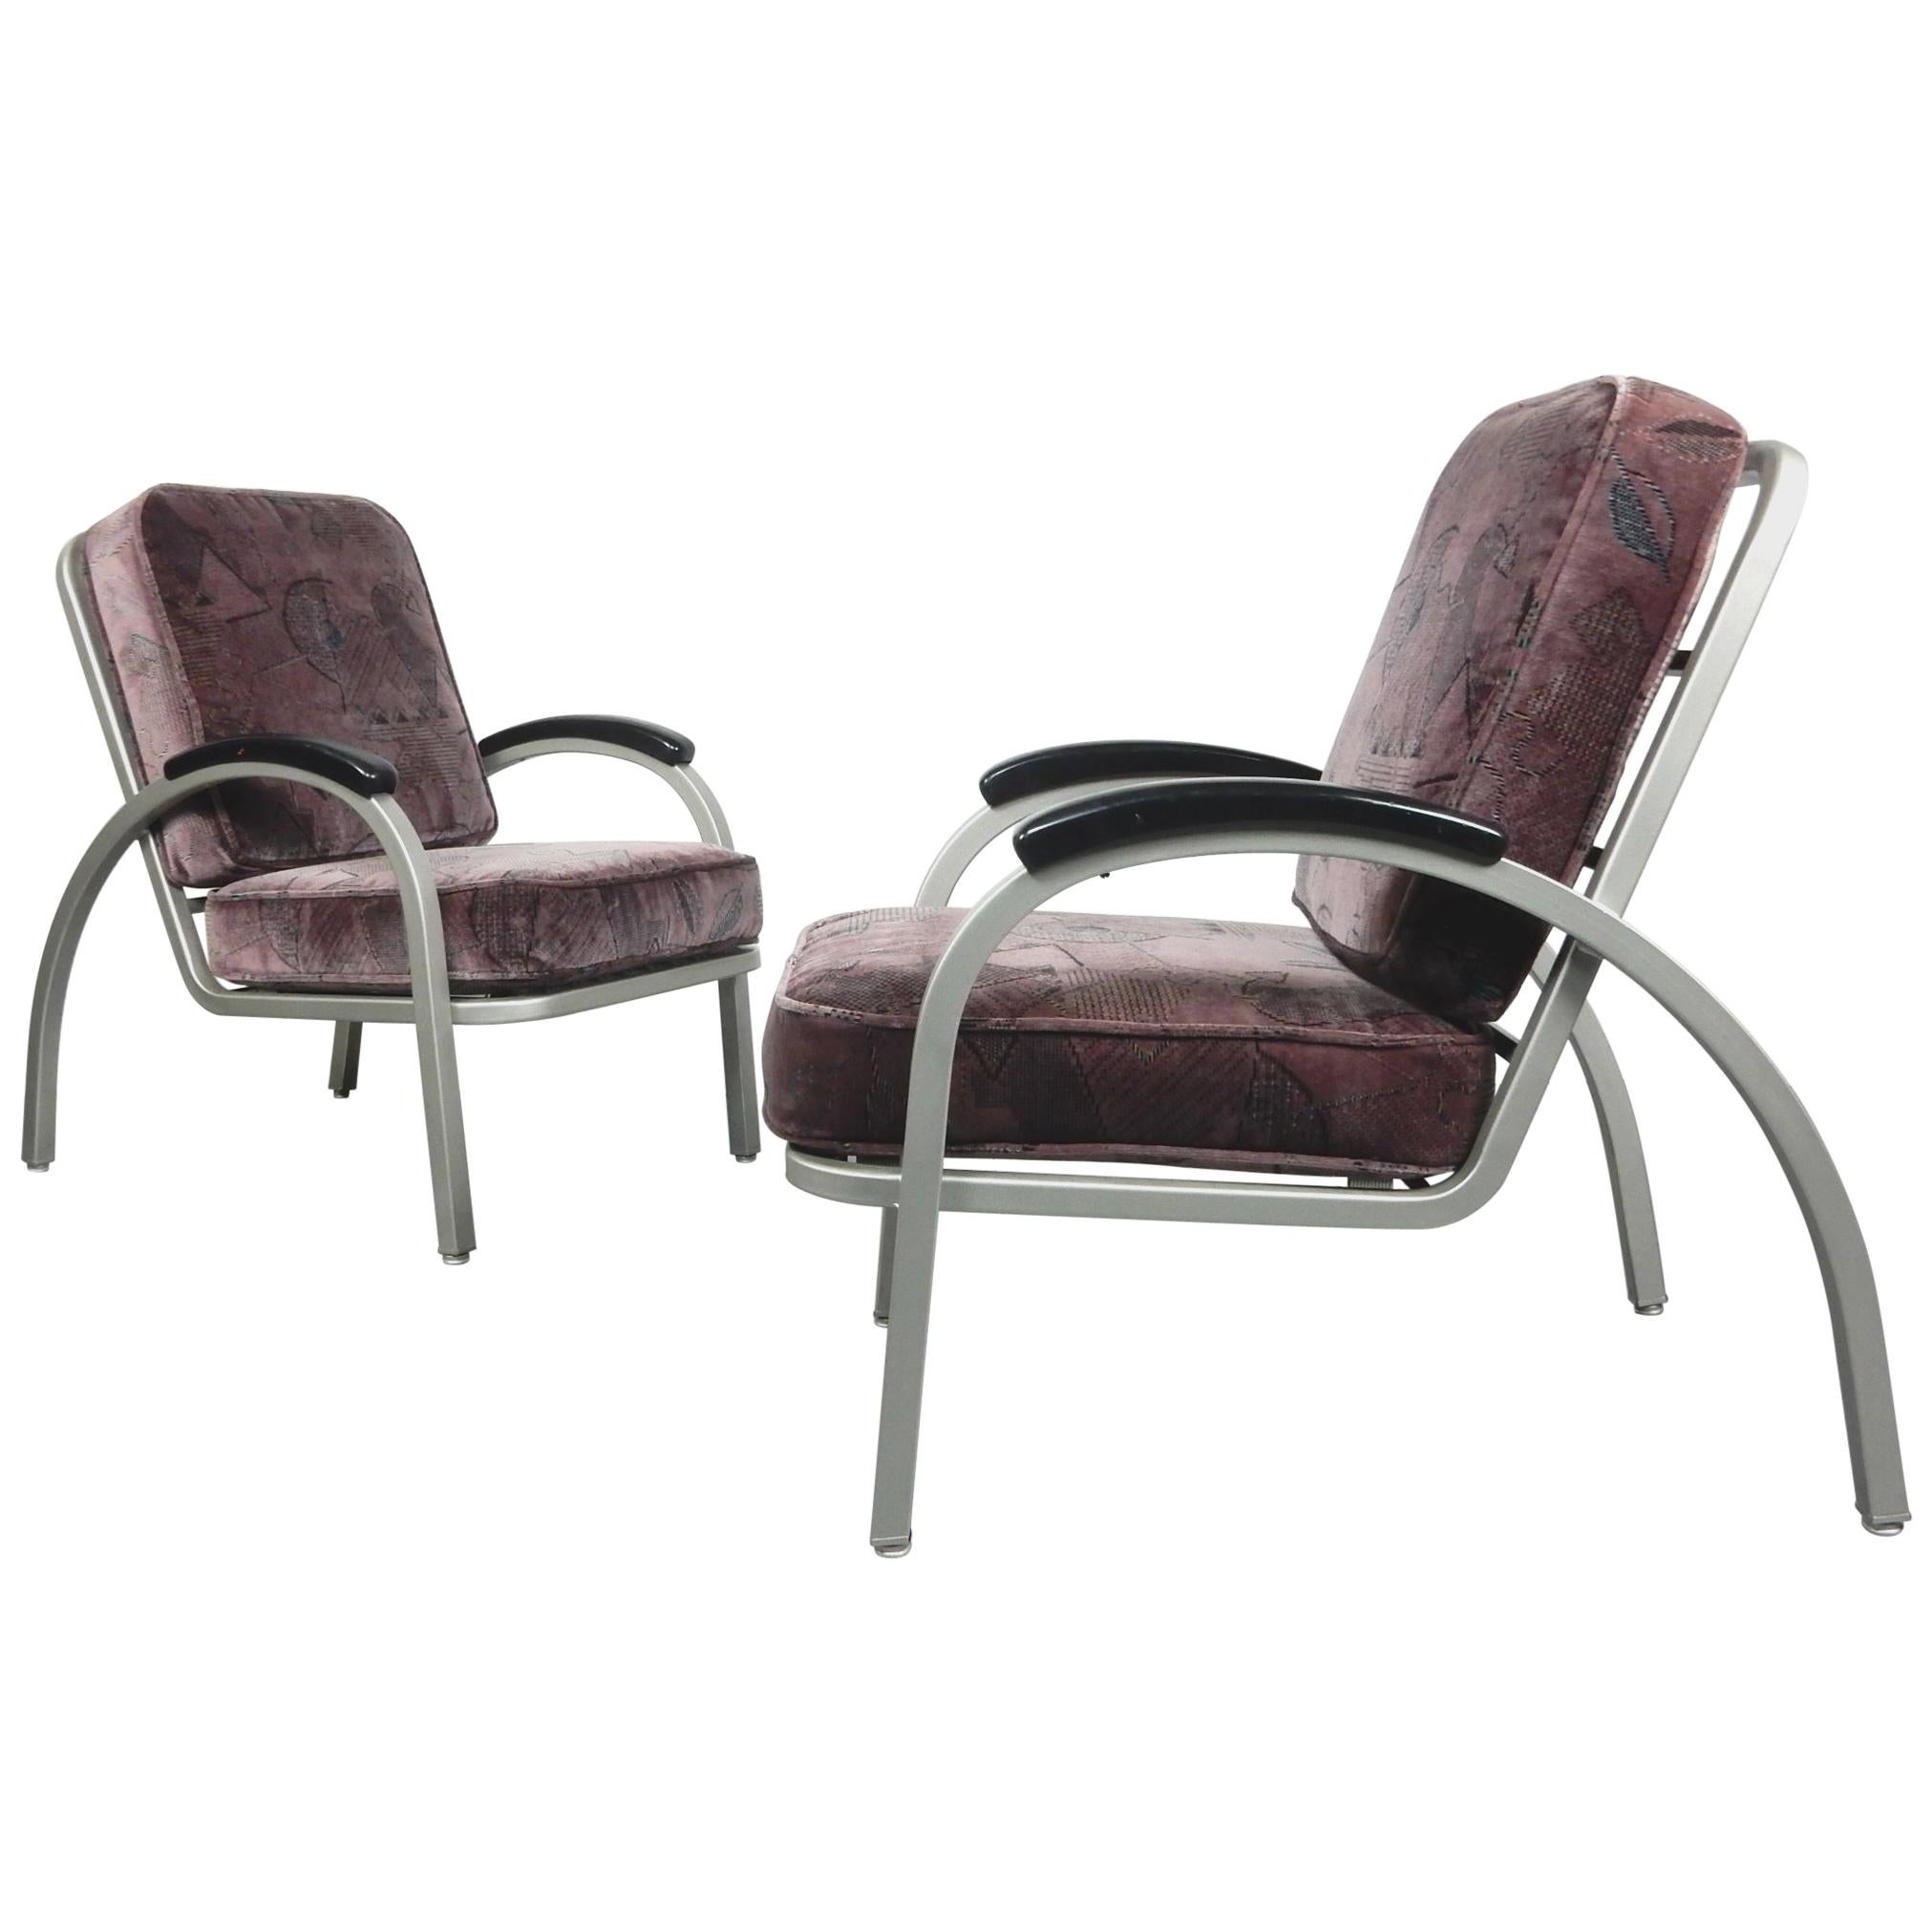 Aluminum Streamline Art Deco Lounge Chairs Designed by Norman Bel Geddes For Sale